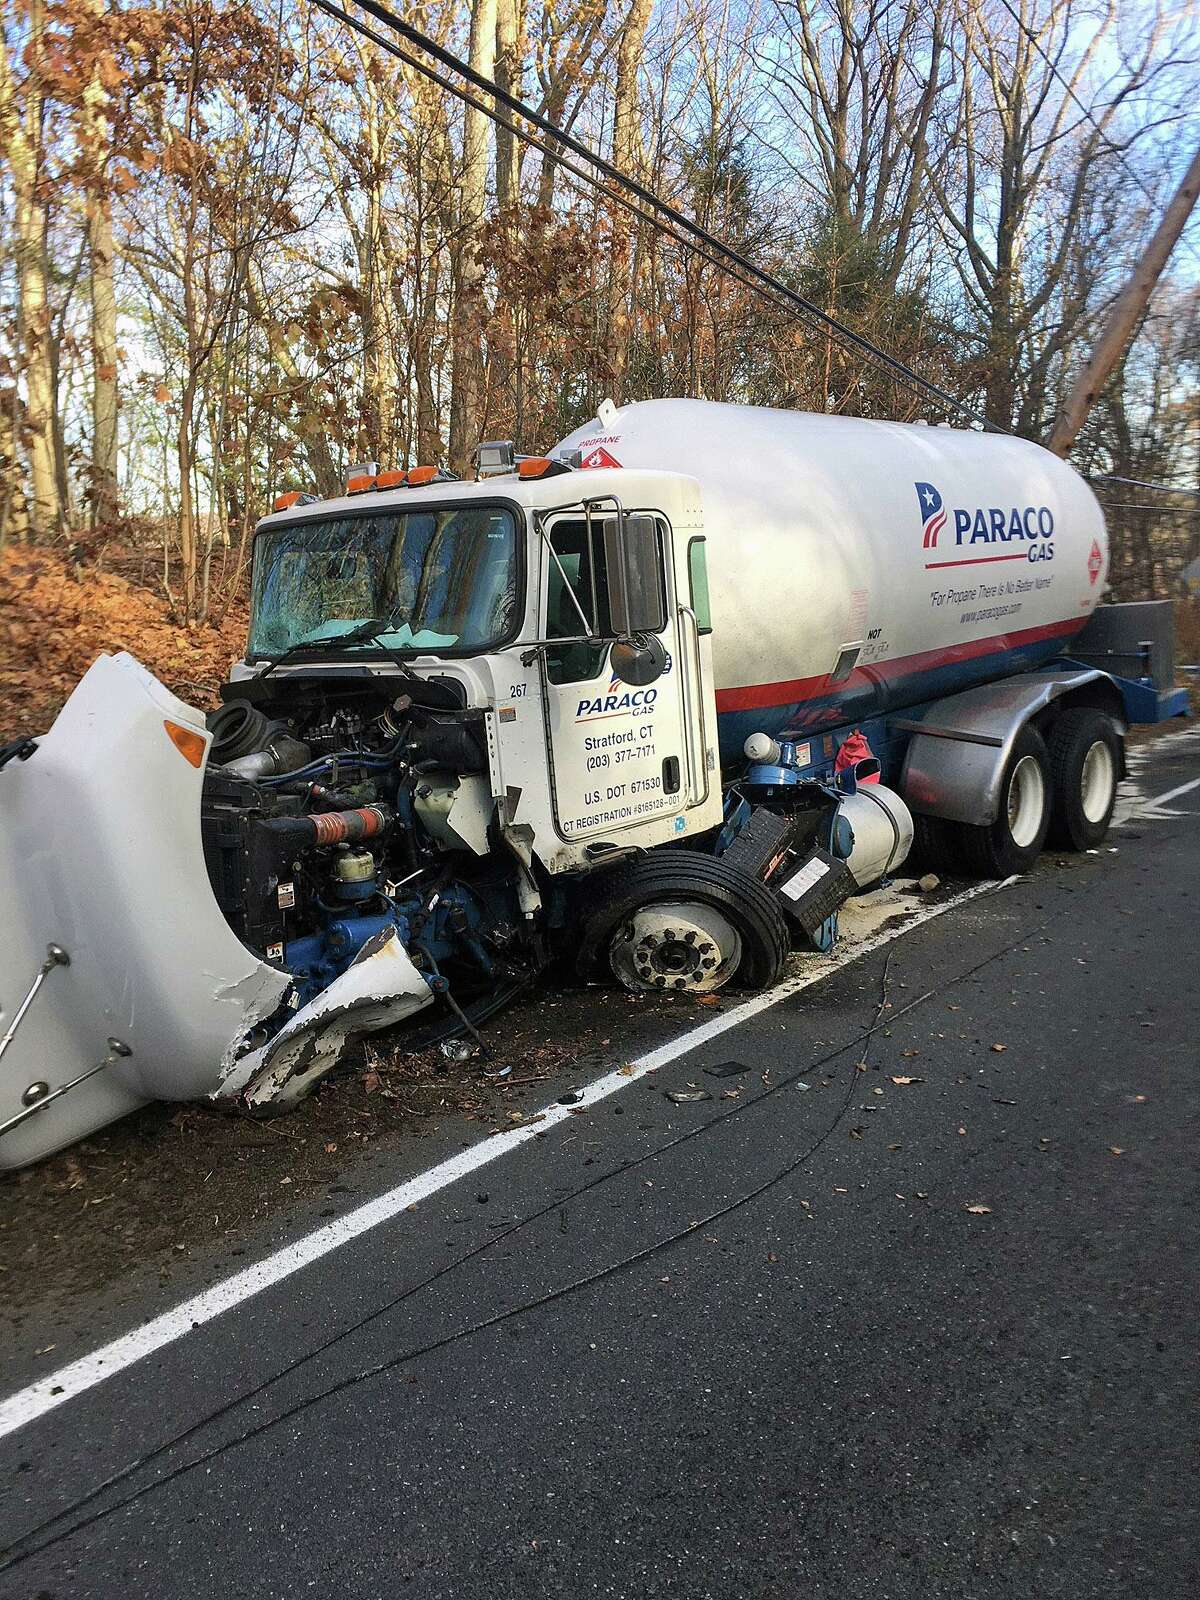 One of the vehicles involved in the crash on Route 110 in Shelton, Conn., on Saturday, Nov. 23, 2019.